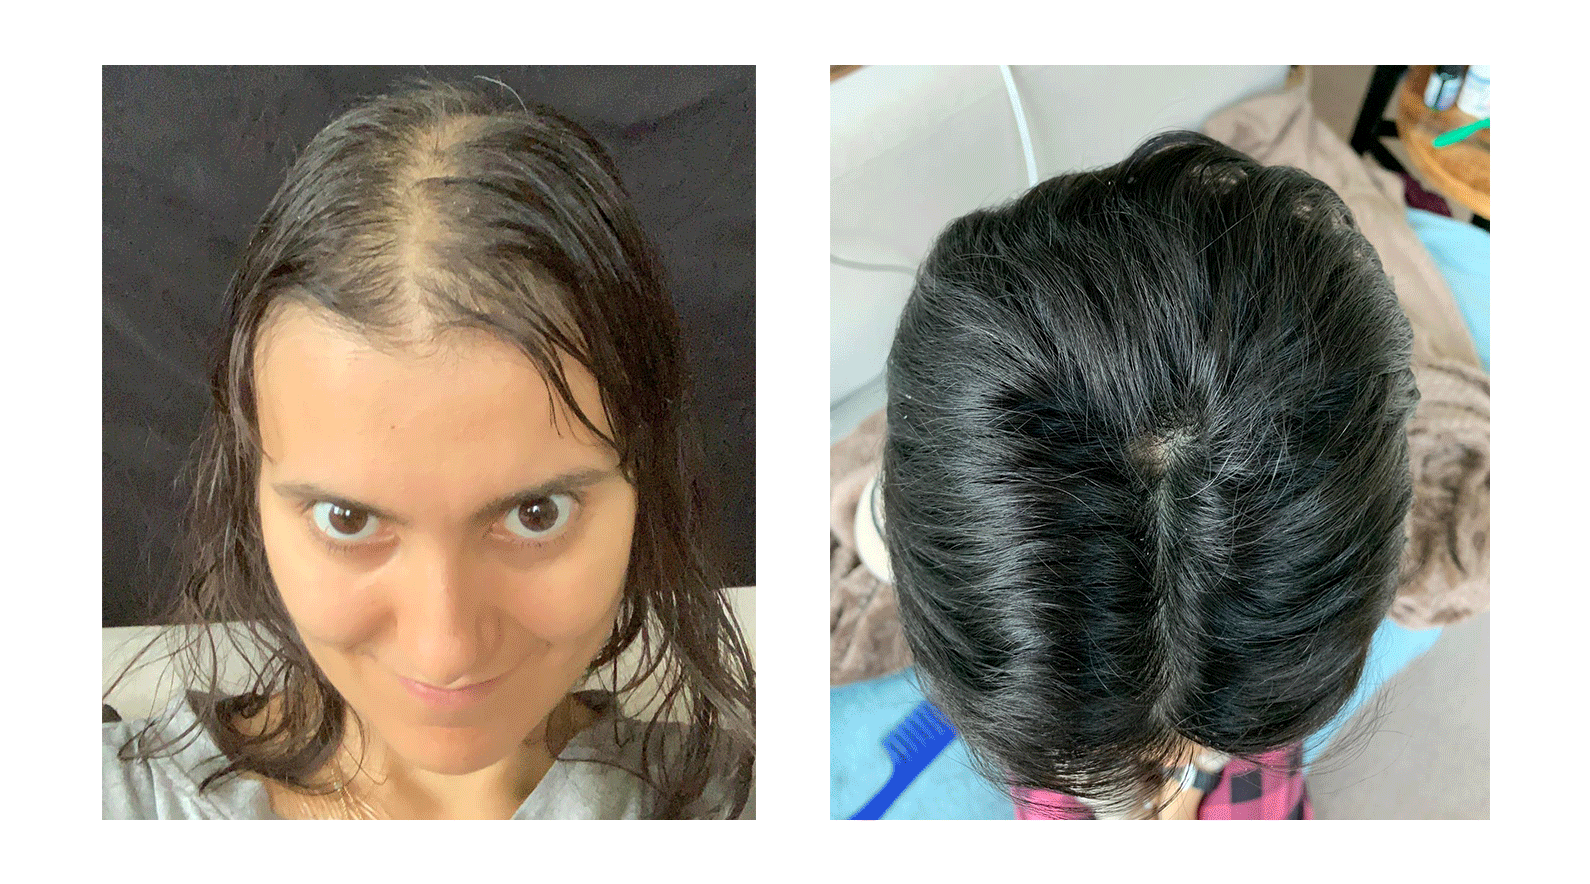 Marcella's AMAZING results after using the More Hair Naturally 9 + the Hair and Scalp Synergy for 6 months!